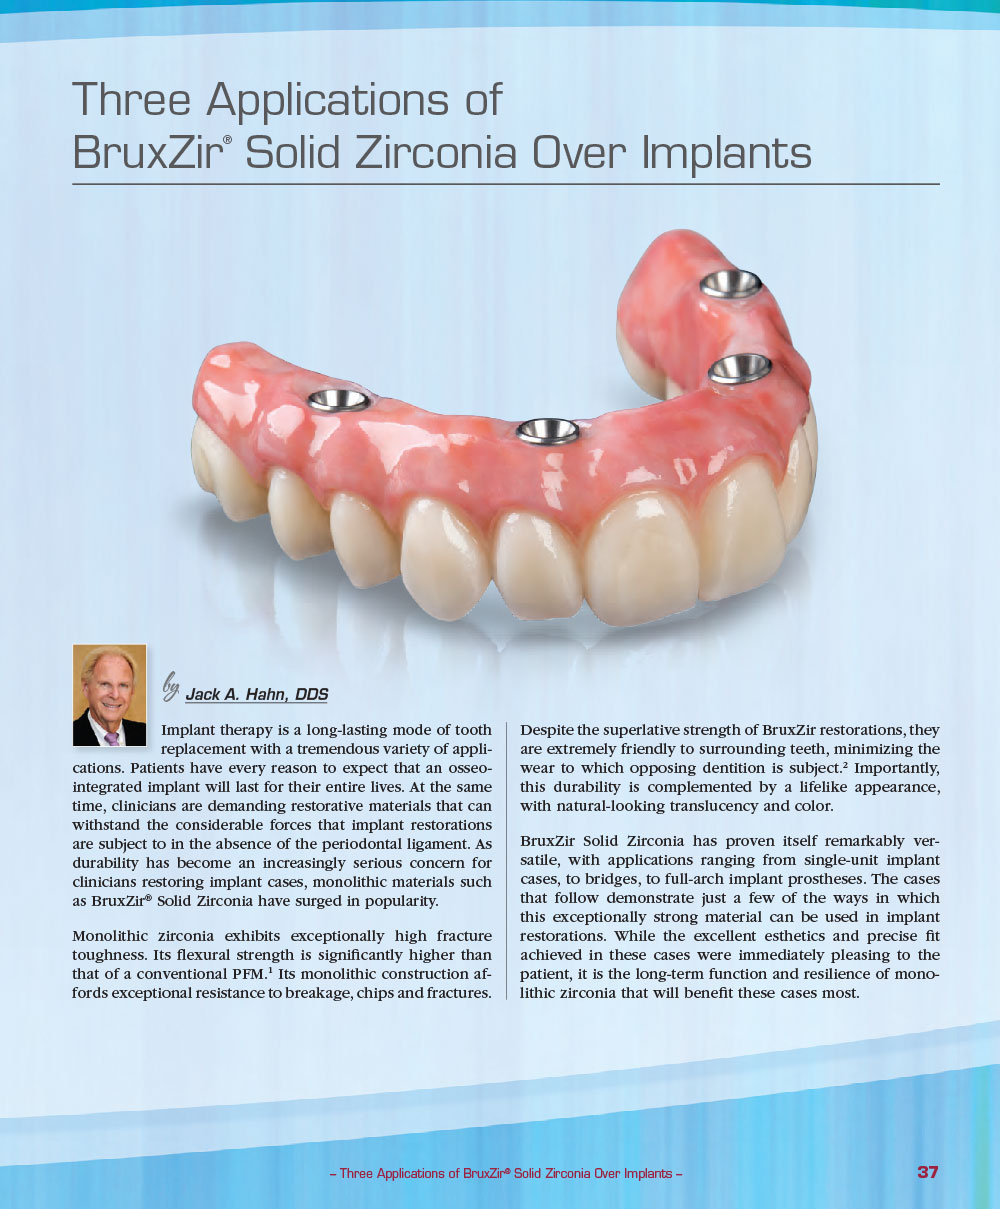 Three Applications of BruxZir® Solid Zirconia Over Implants by Jack A. Hahn, DDS